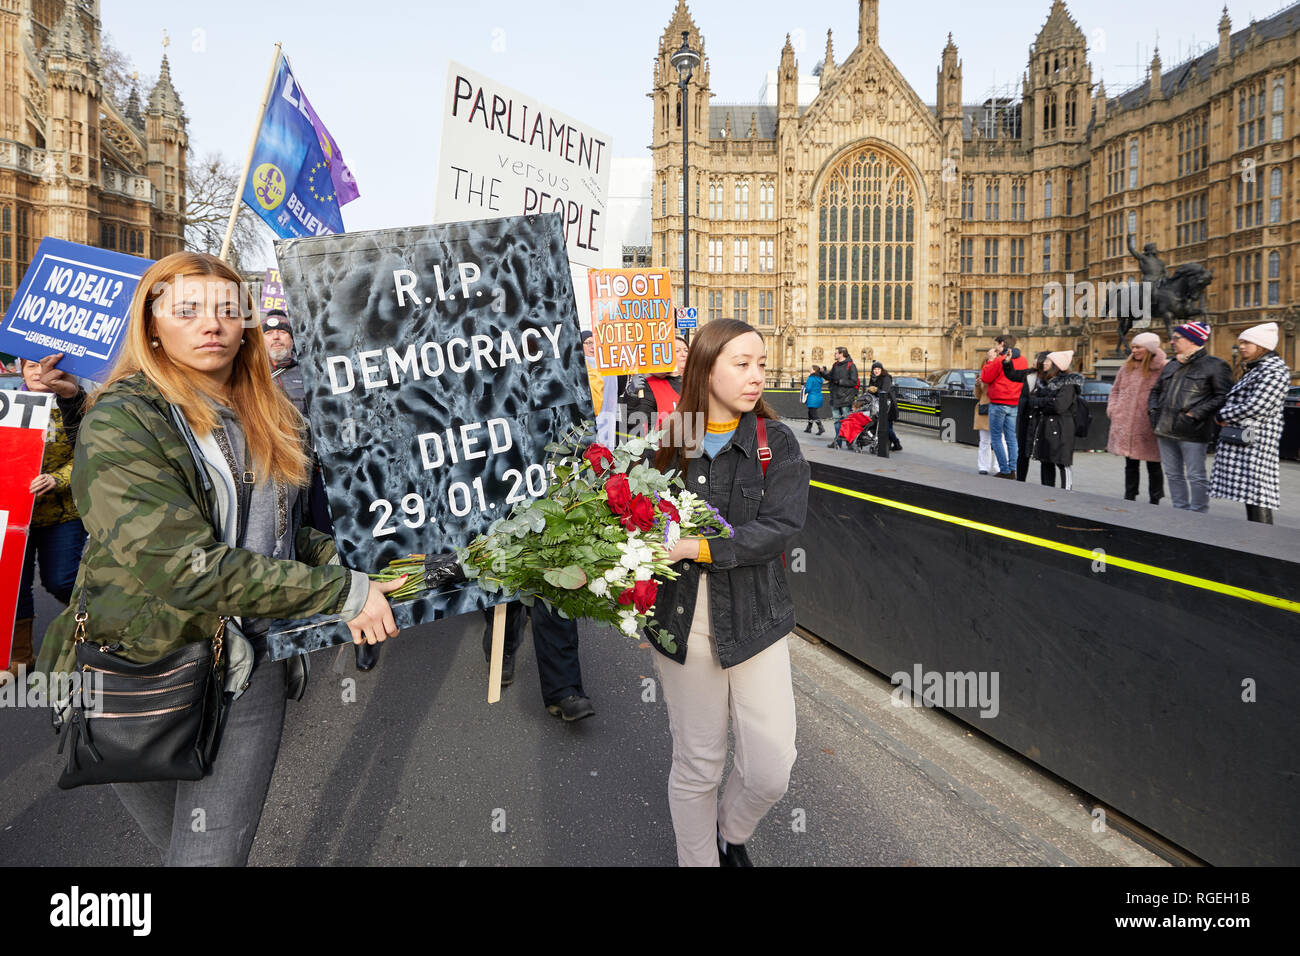 London, UK. - Jan 29, 2019: Protestors hold a funeral march outside Parliament on a crucial day for Brexit discussion inside the House of Commons. Credit: Kevin J. Frost/Alamy Live News Stock Photo